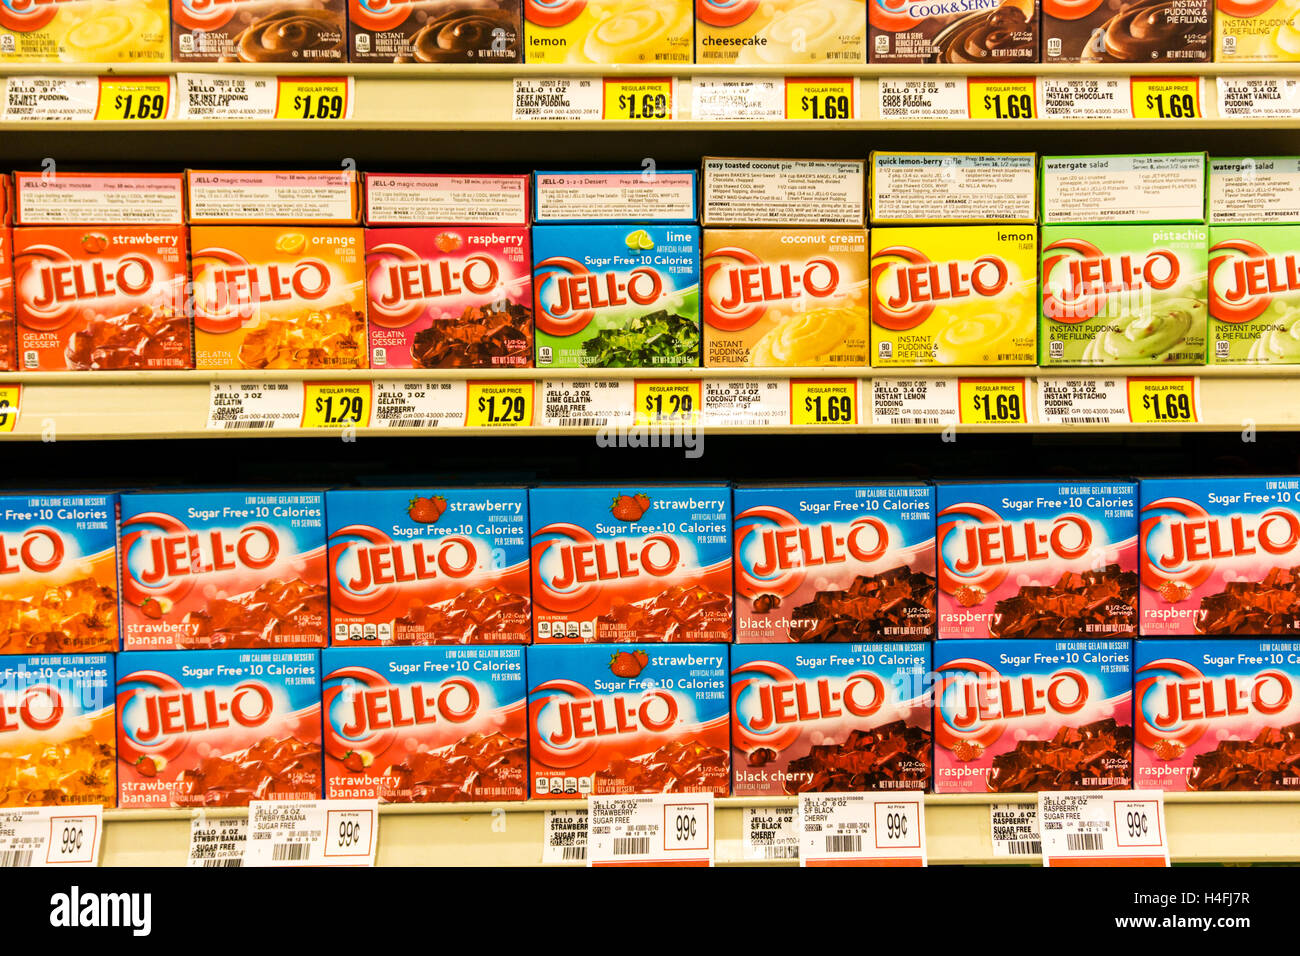 Packets of Jell-O jelly for sale in an American supermarket. Stock Photo